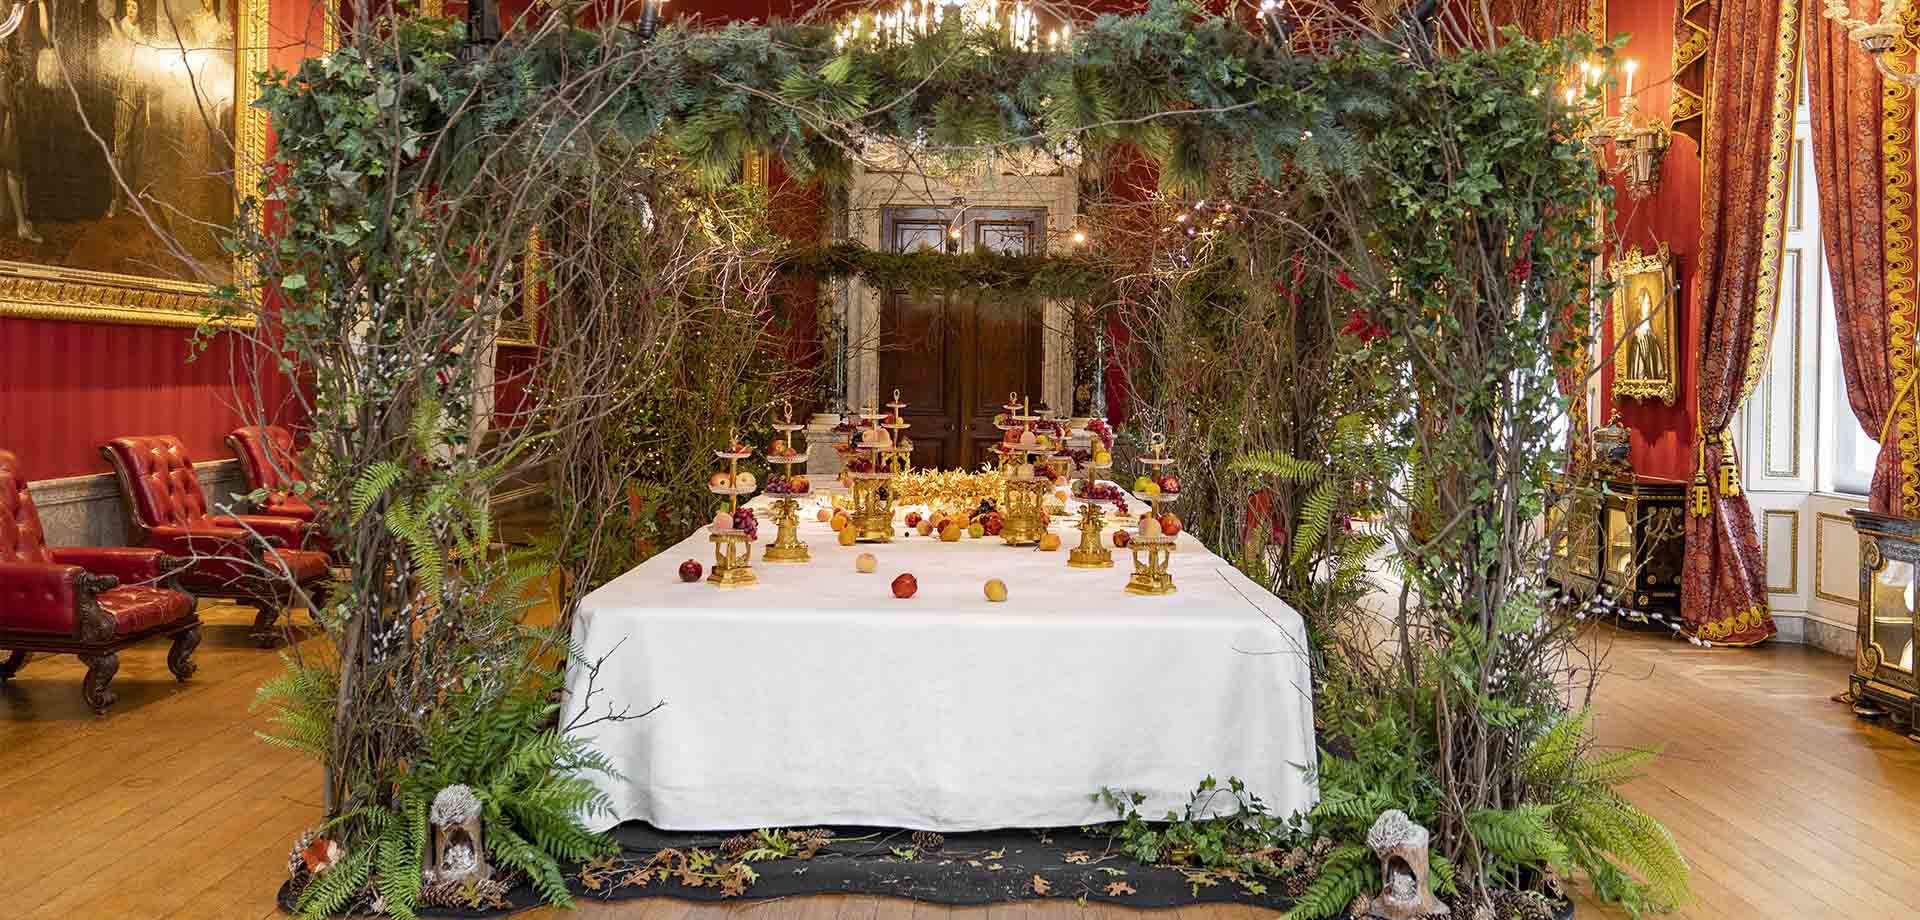 Scents and sustainability: Christmas at Chatsworth